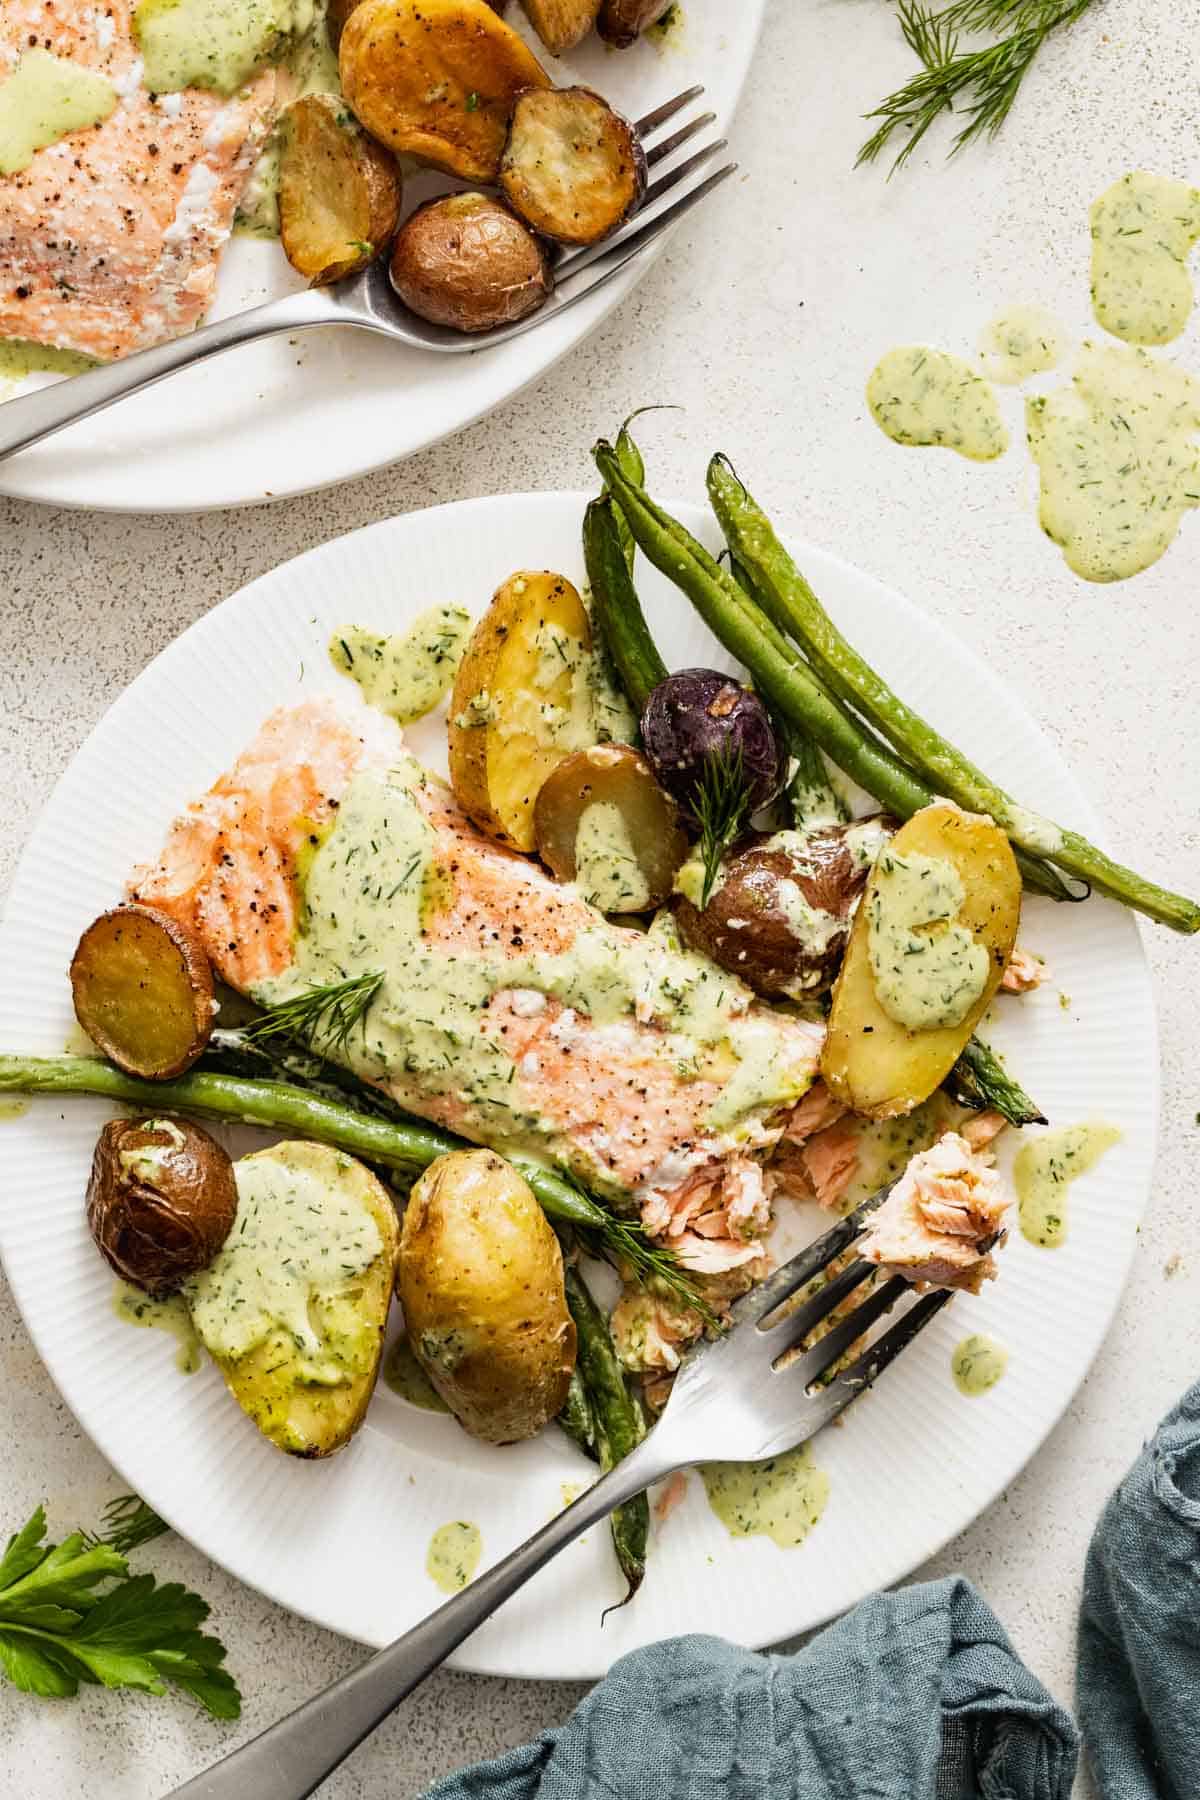 Salmon and green beans on a white plate with a fork.